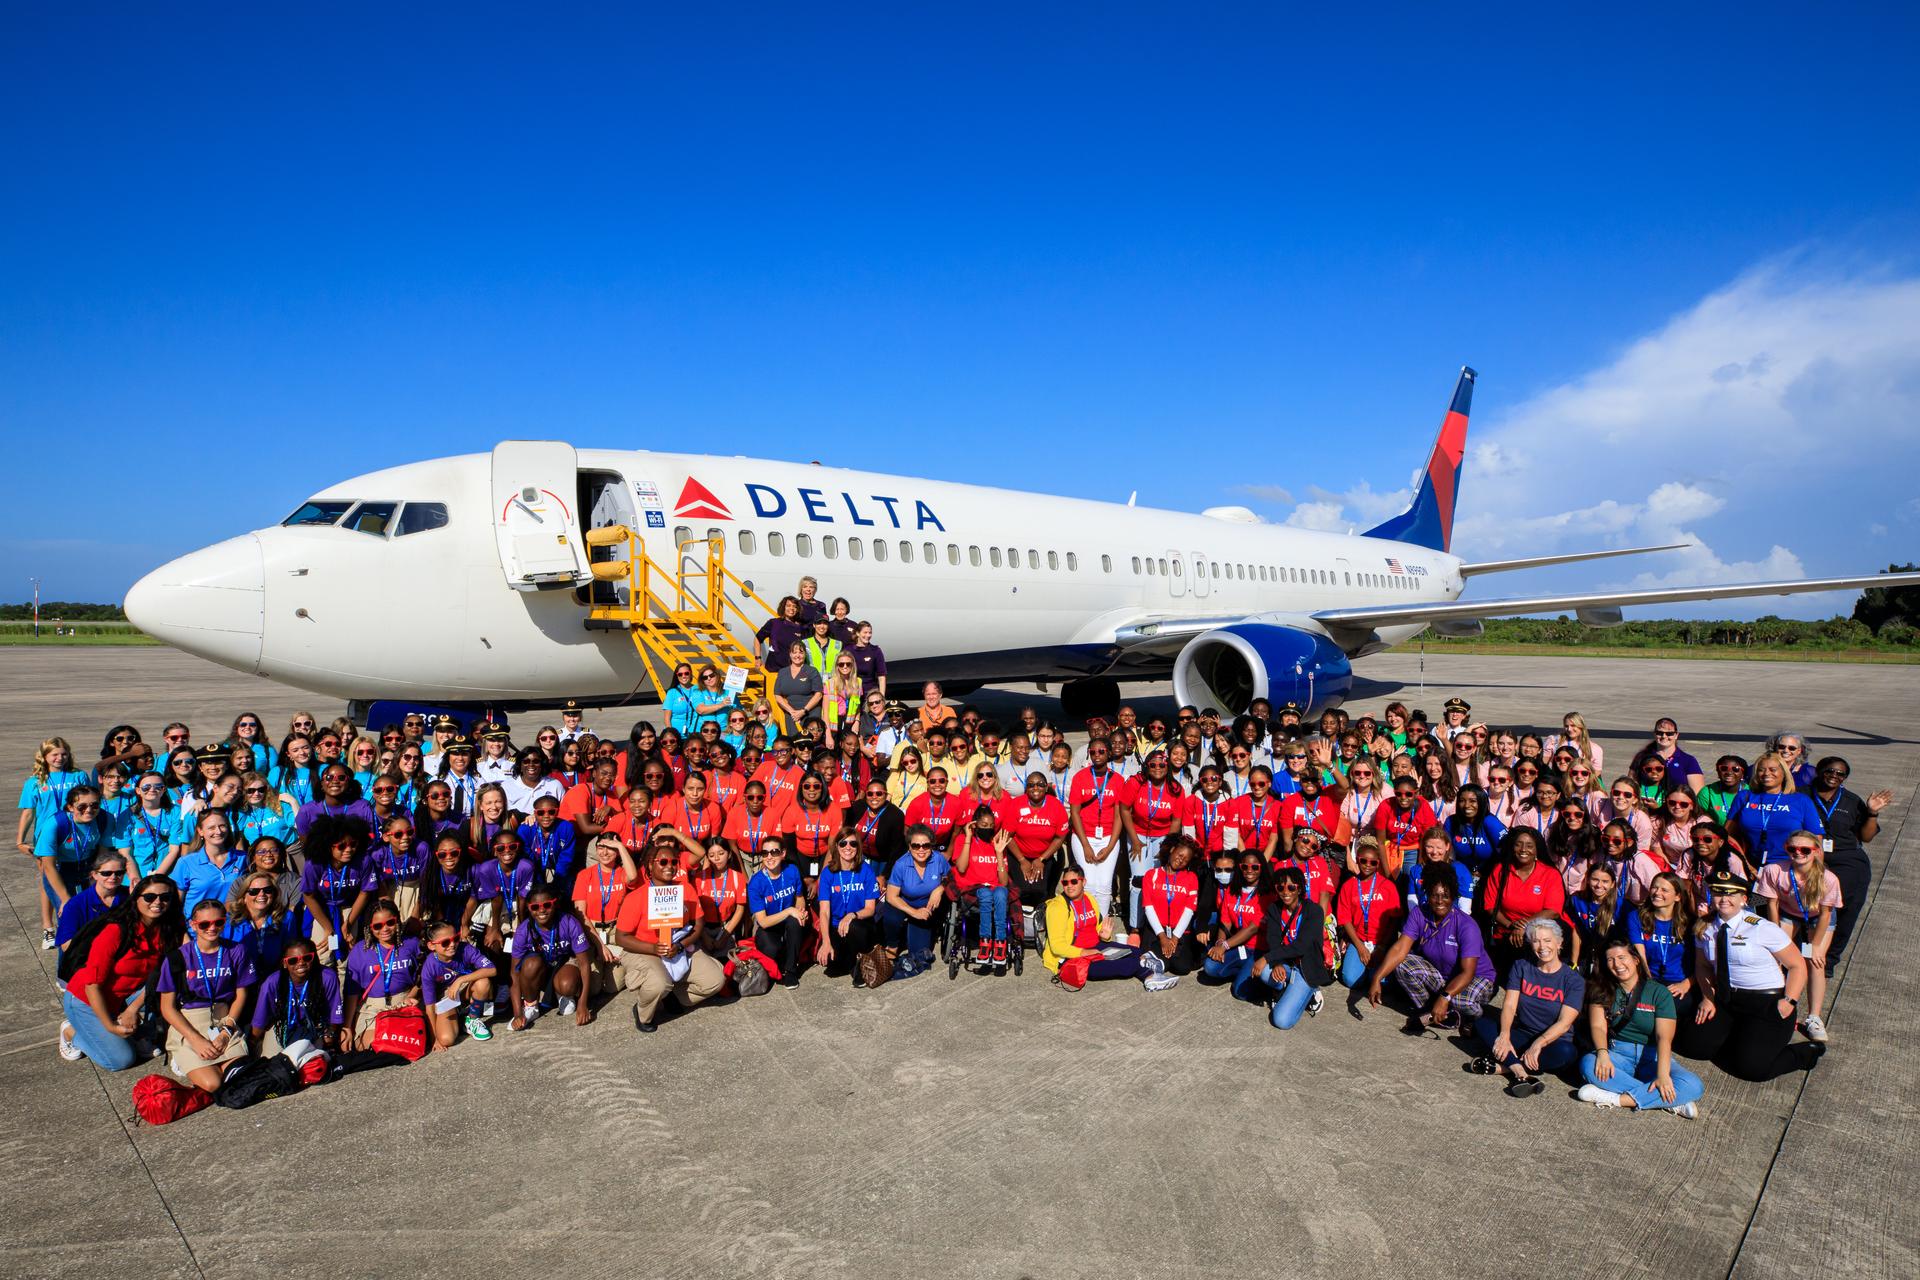 Students from various schools and organizations with a STEM (science, technology, engineering, math) focus are photographed with employees from NASA’s Kennedy Space Center at the Launch and Landing Facility following their arrival to Kennedy on Friday, Sept. 22, 2023, as part of Delta Air Lines’ Women Inspiring Our Next Generation (WING) flight.